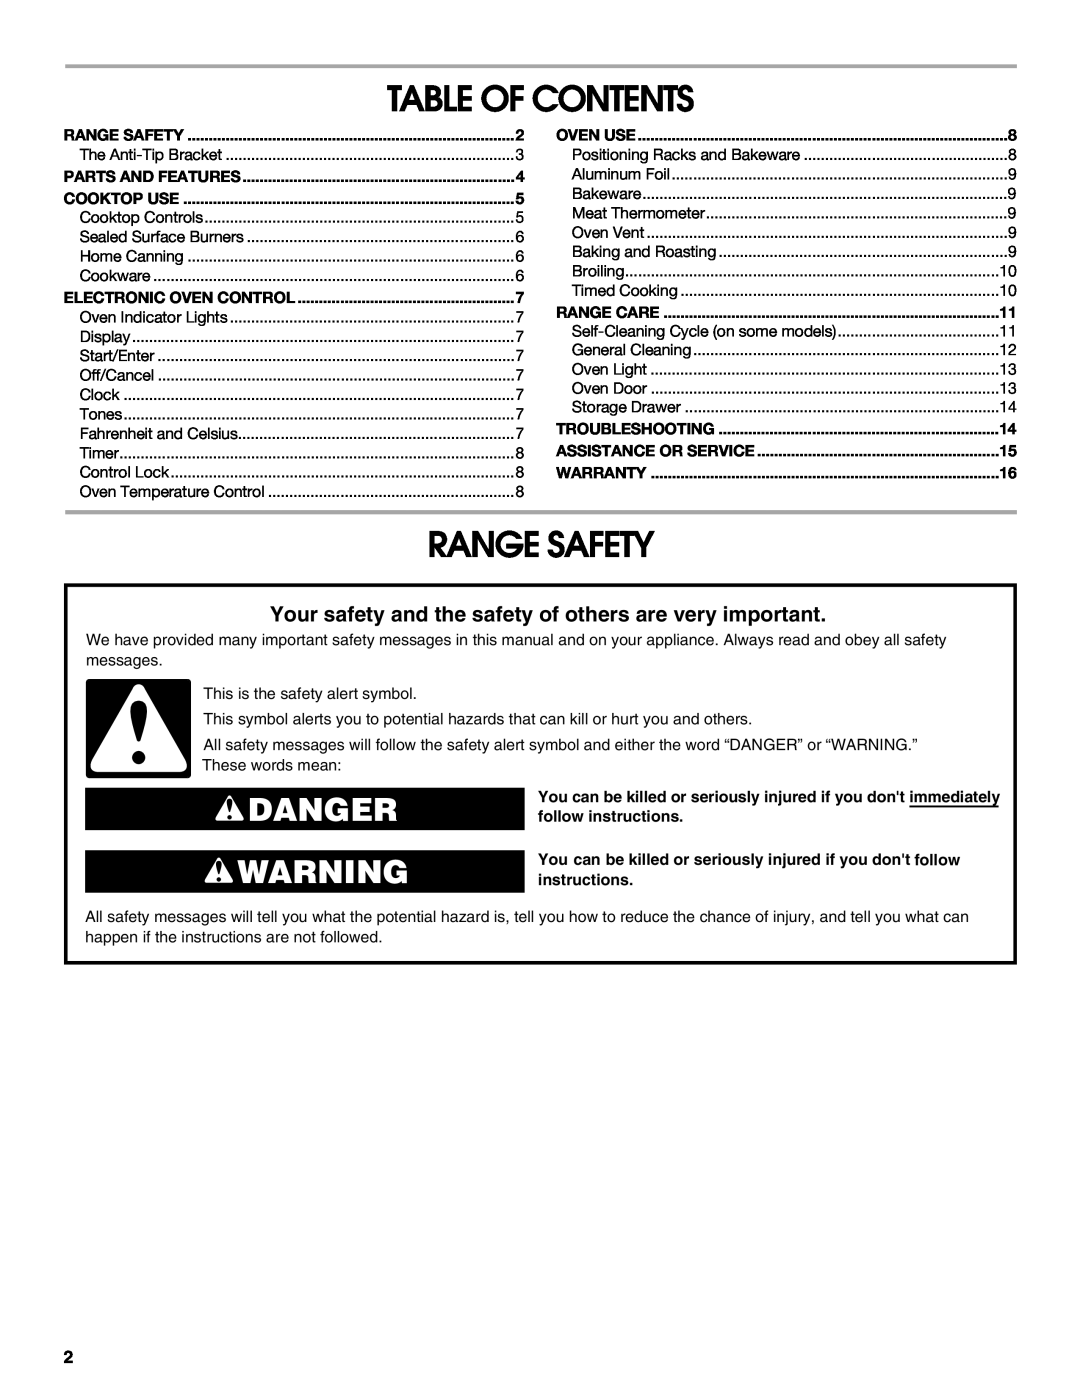 Whirlpool TGS325MQ3 manual Table Of Contents, Range Safety, Danger 